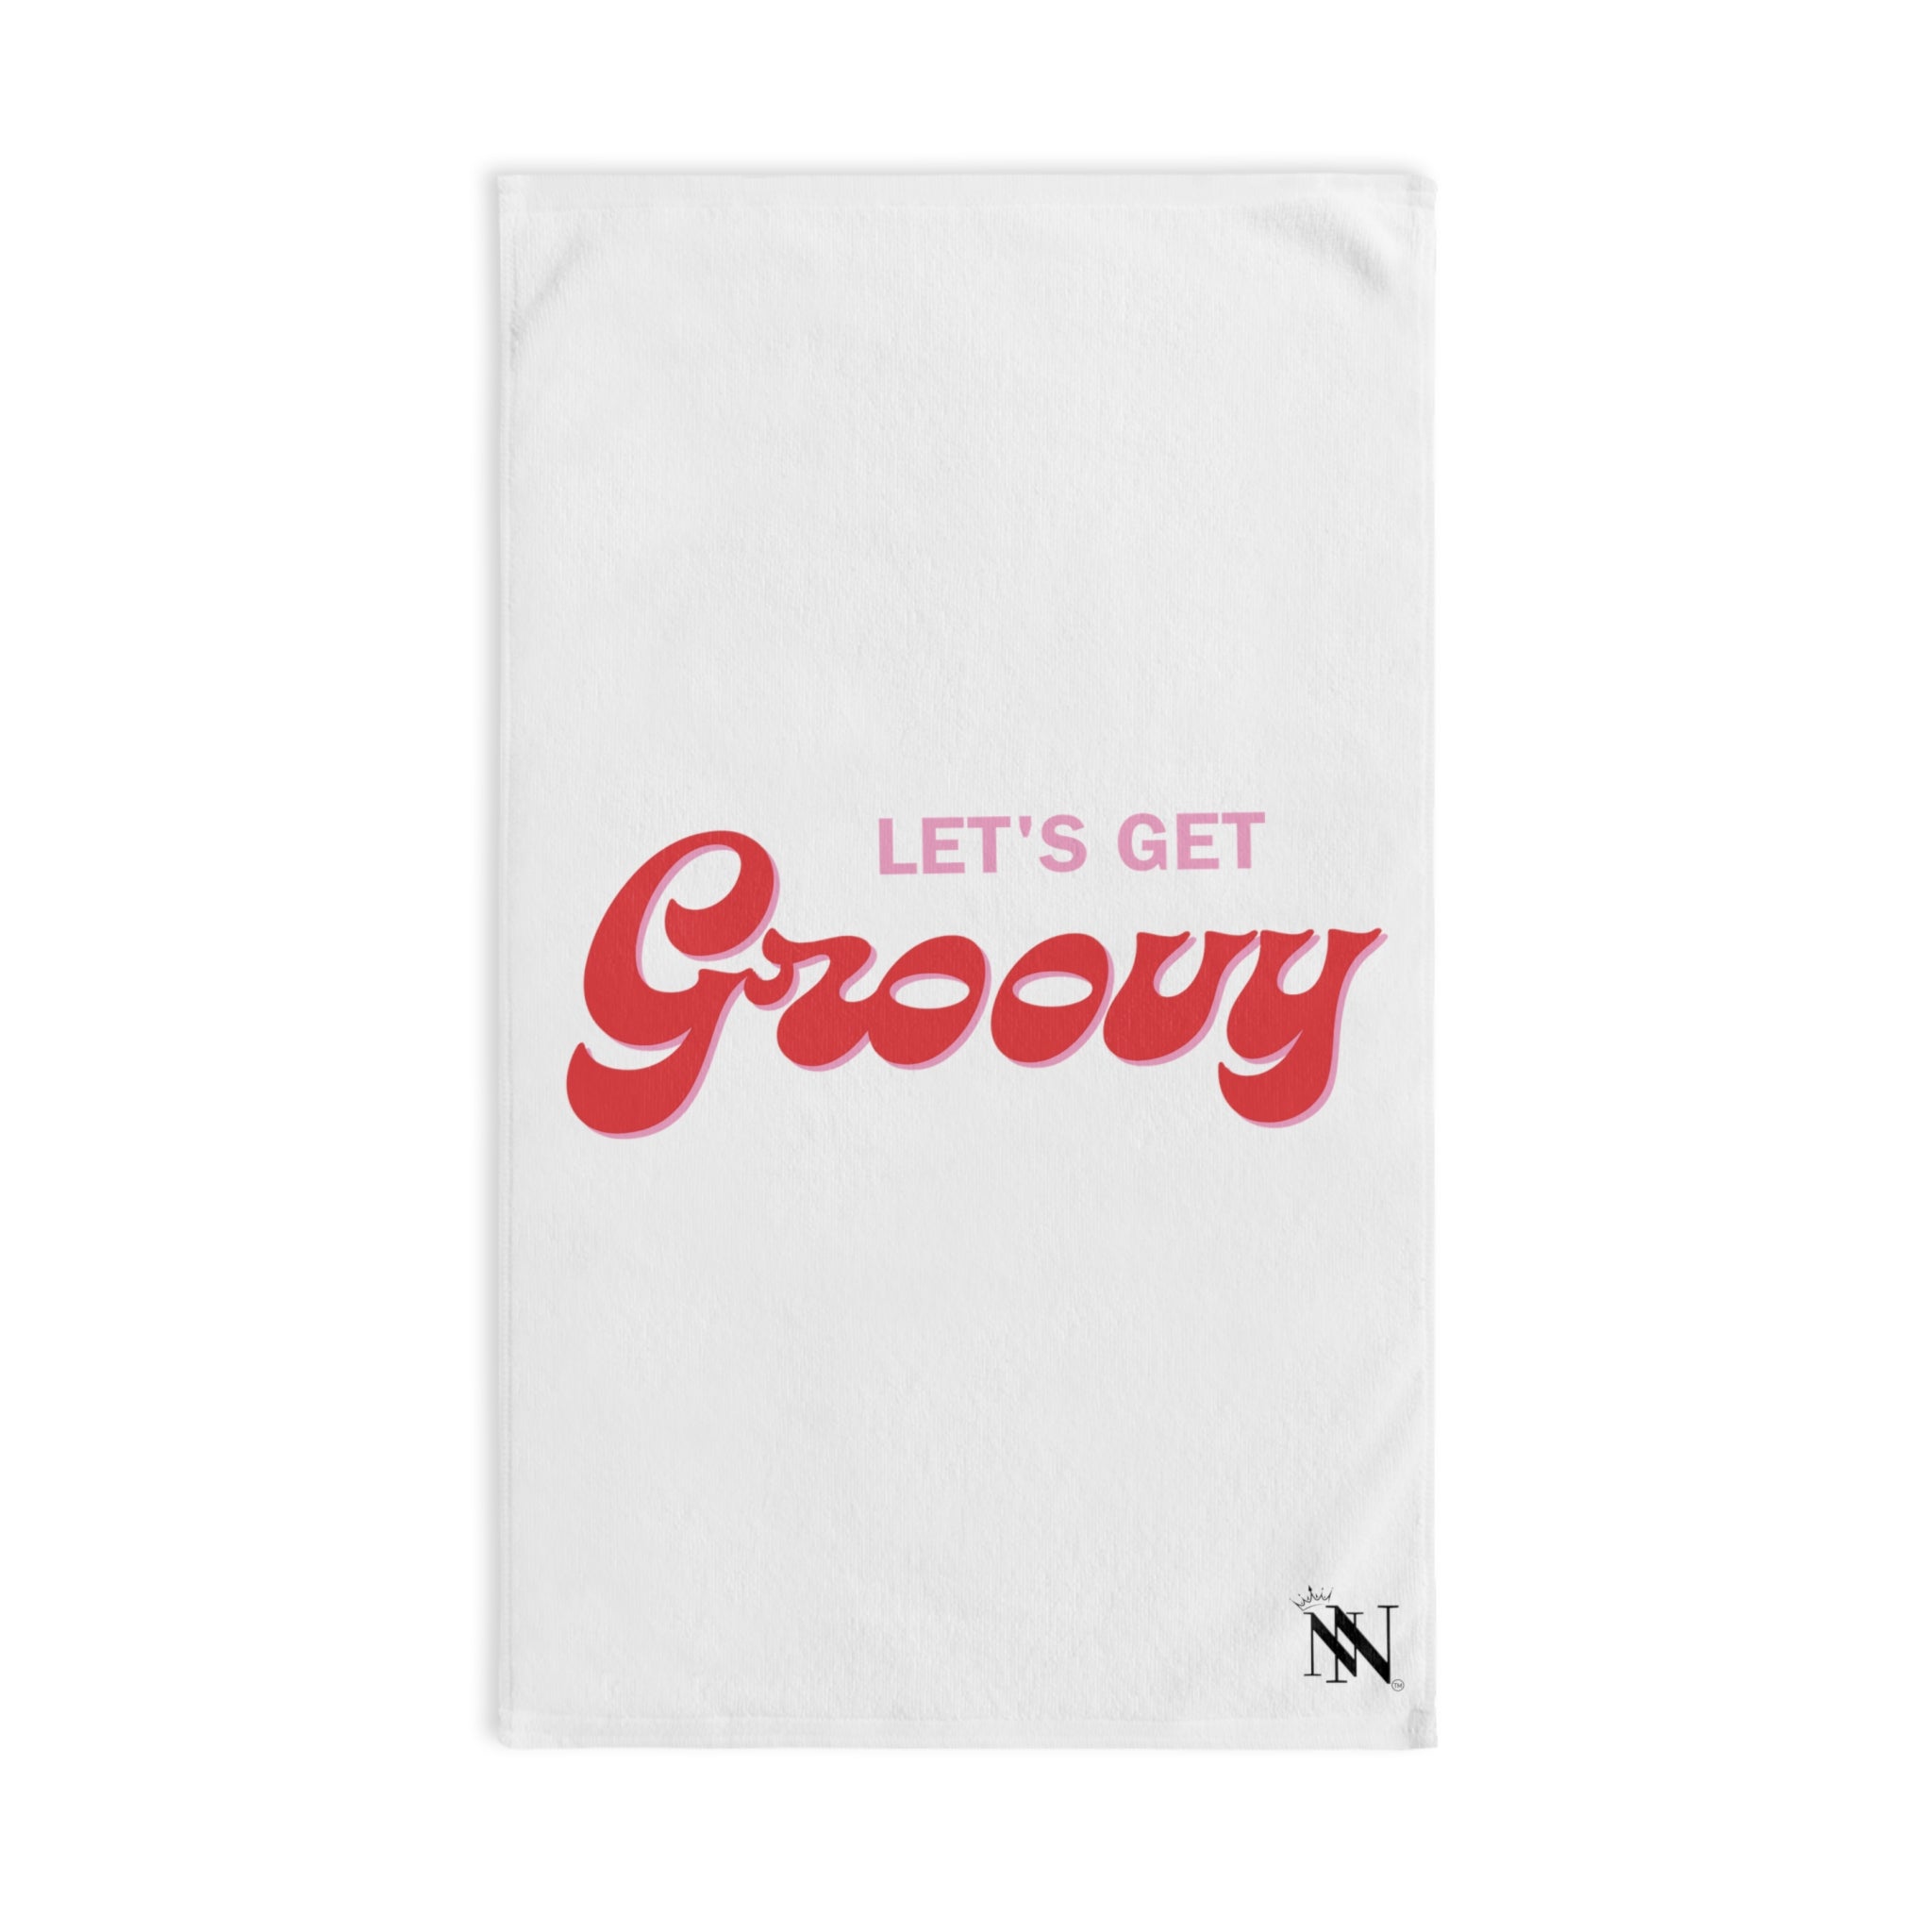 Get Groovy White | Funny Gifts for Men - Gifts for Him - Birthday Gifts for Men, Him, Her, Husband, Boyfriend, Girlfriend, New Couple Gifts, Fathers & Valentines Day Gifts, Christmas Gifts NECTAR NAPKINS